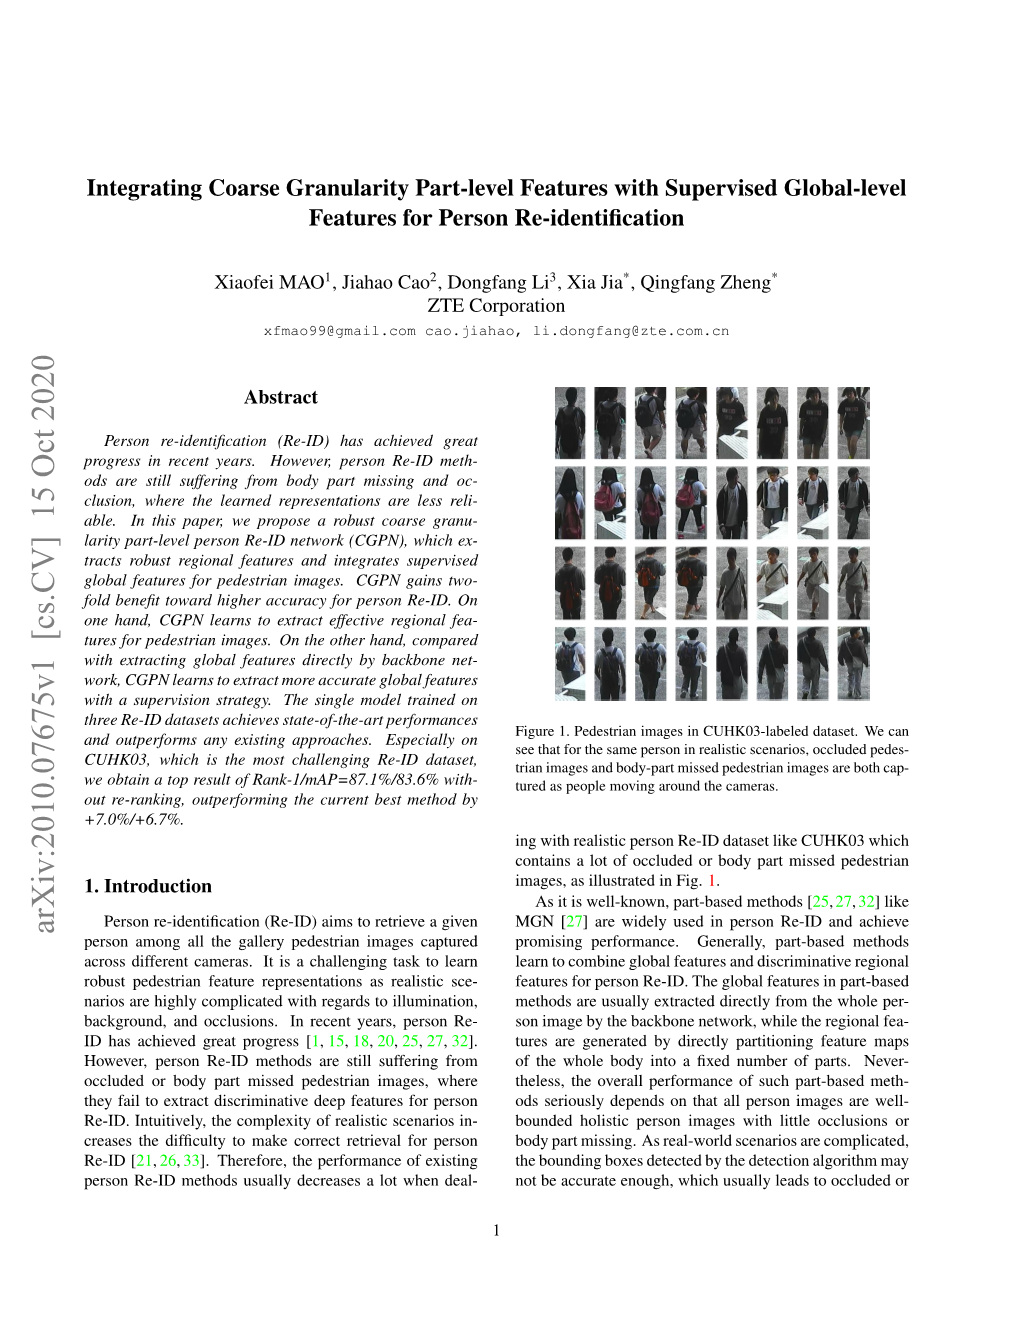 Integrating Coarse Granularity Part-Level Features with Supervised Global-Level Features for Person Re-Identiﬁcation